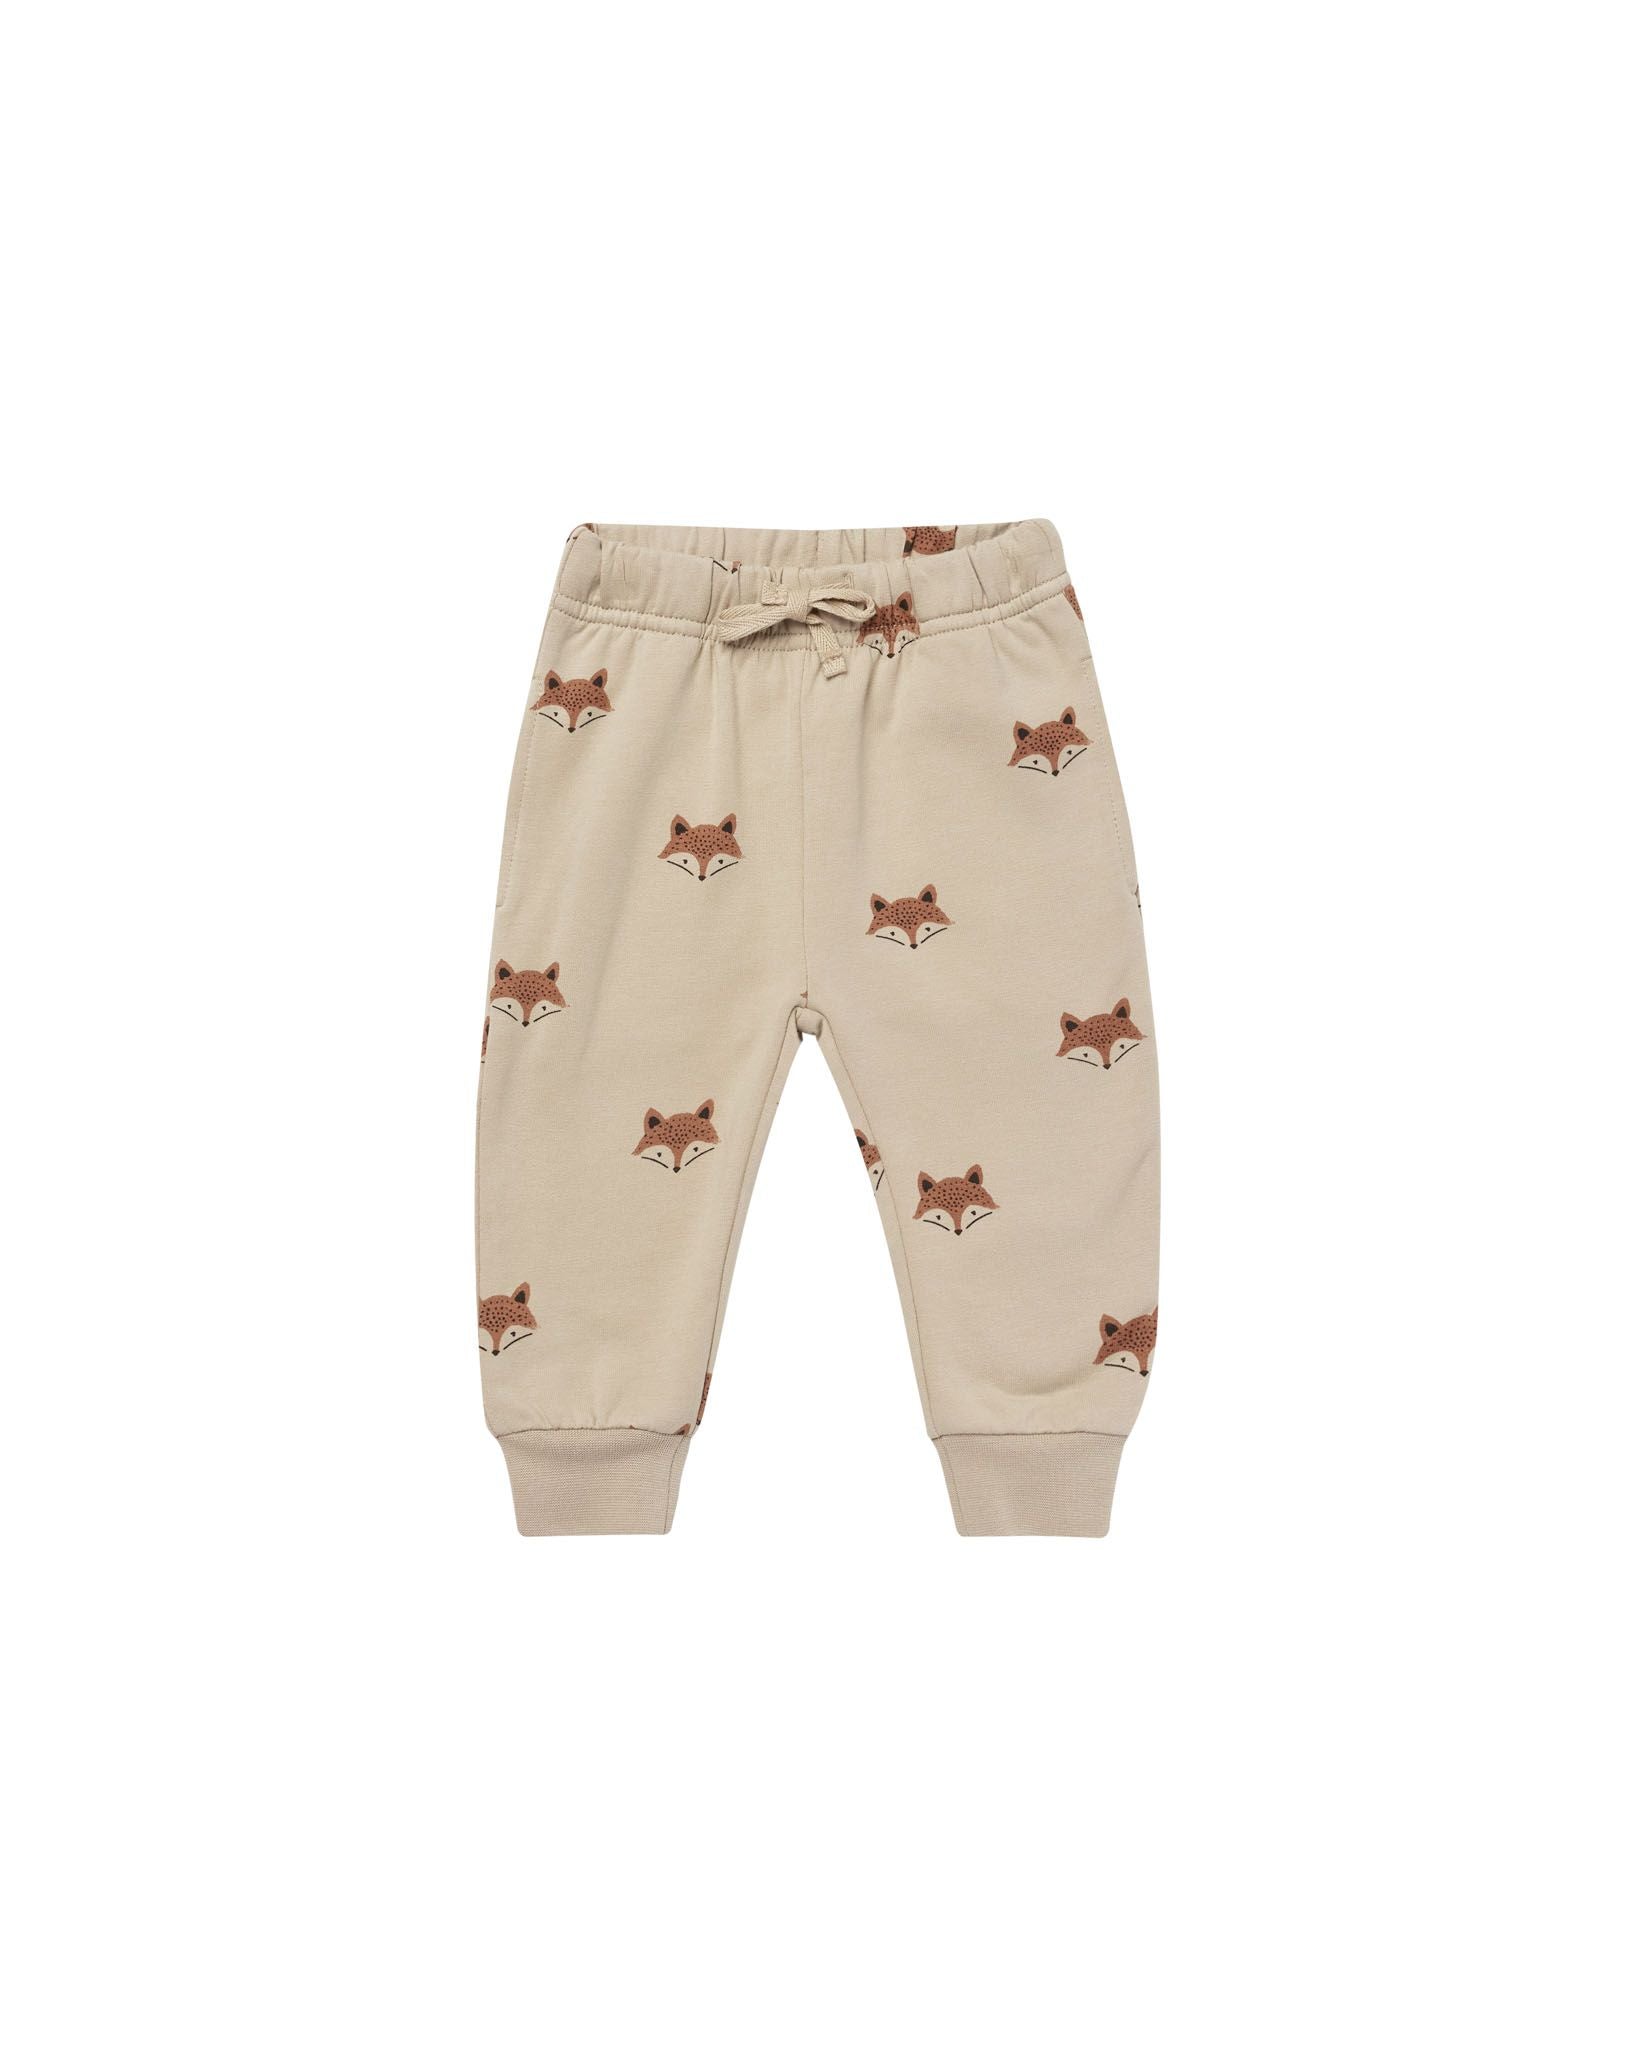 Quincy Mae Relaxed Fleece Sweatpants | Foxes